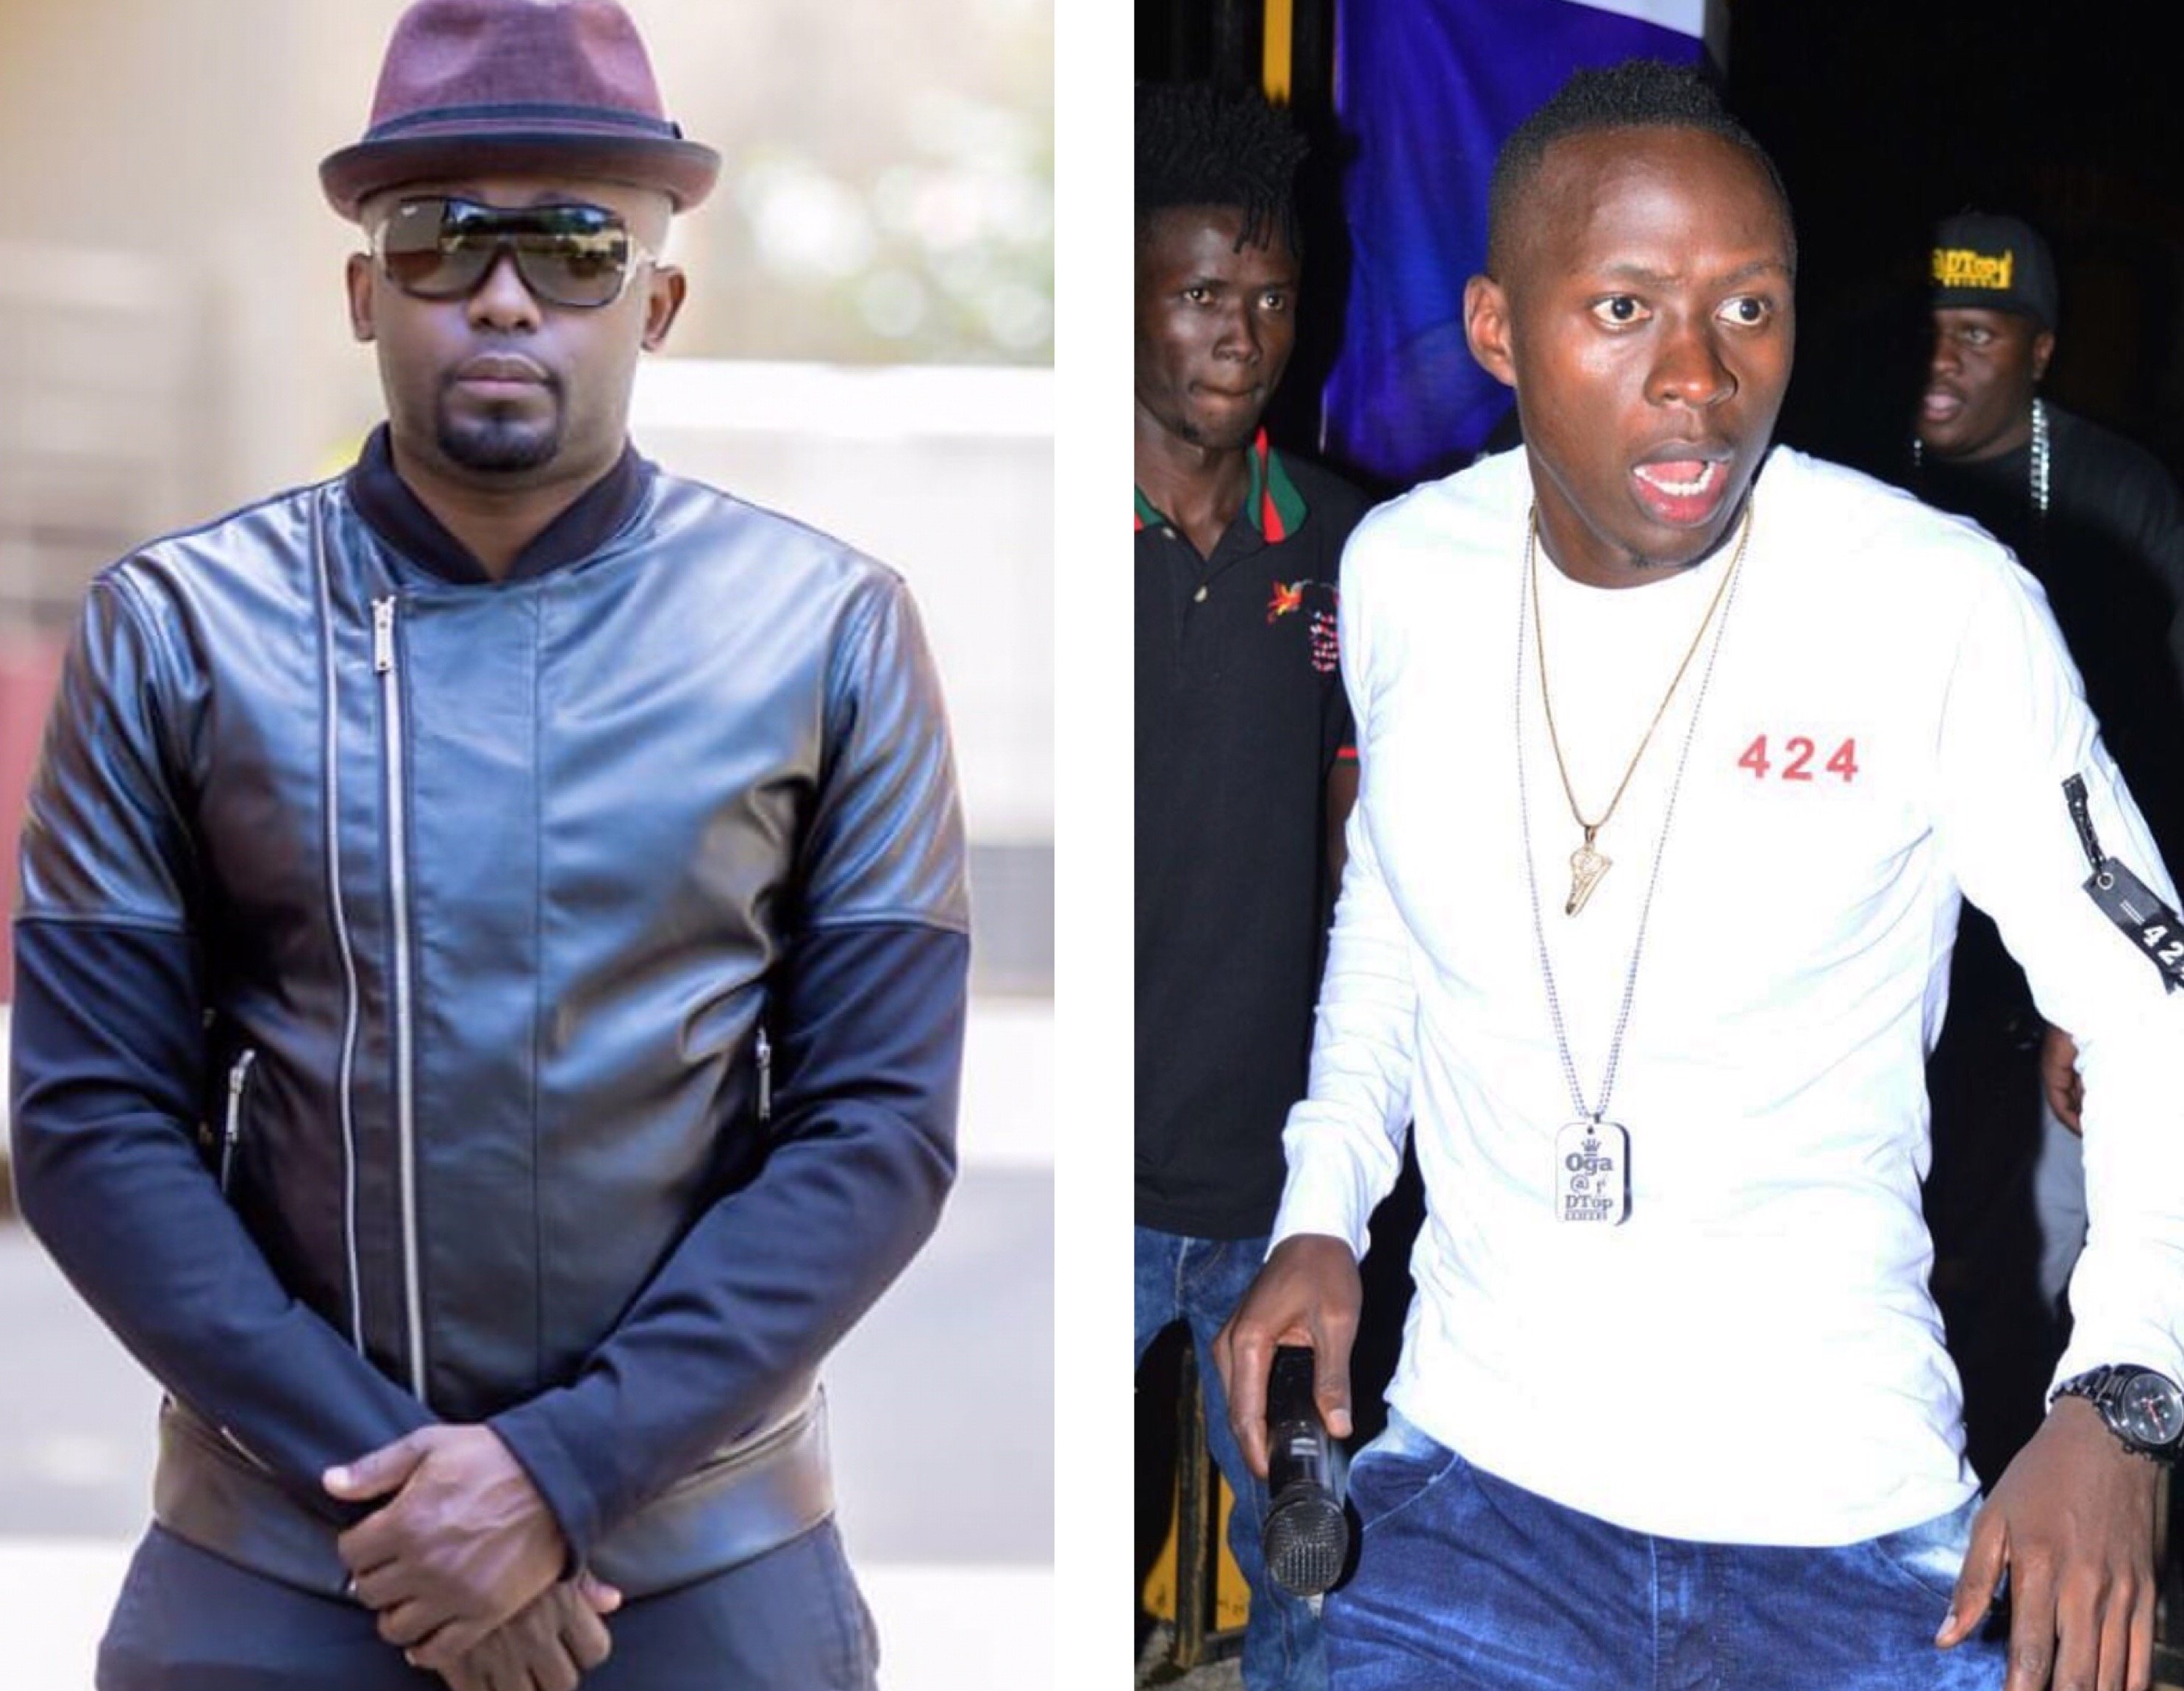 Nairobi Diaries Brian steps in to savagely tell off popular comedian who trolled his wife, Risper Faith